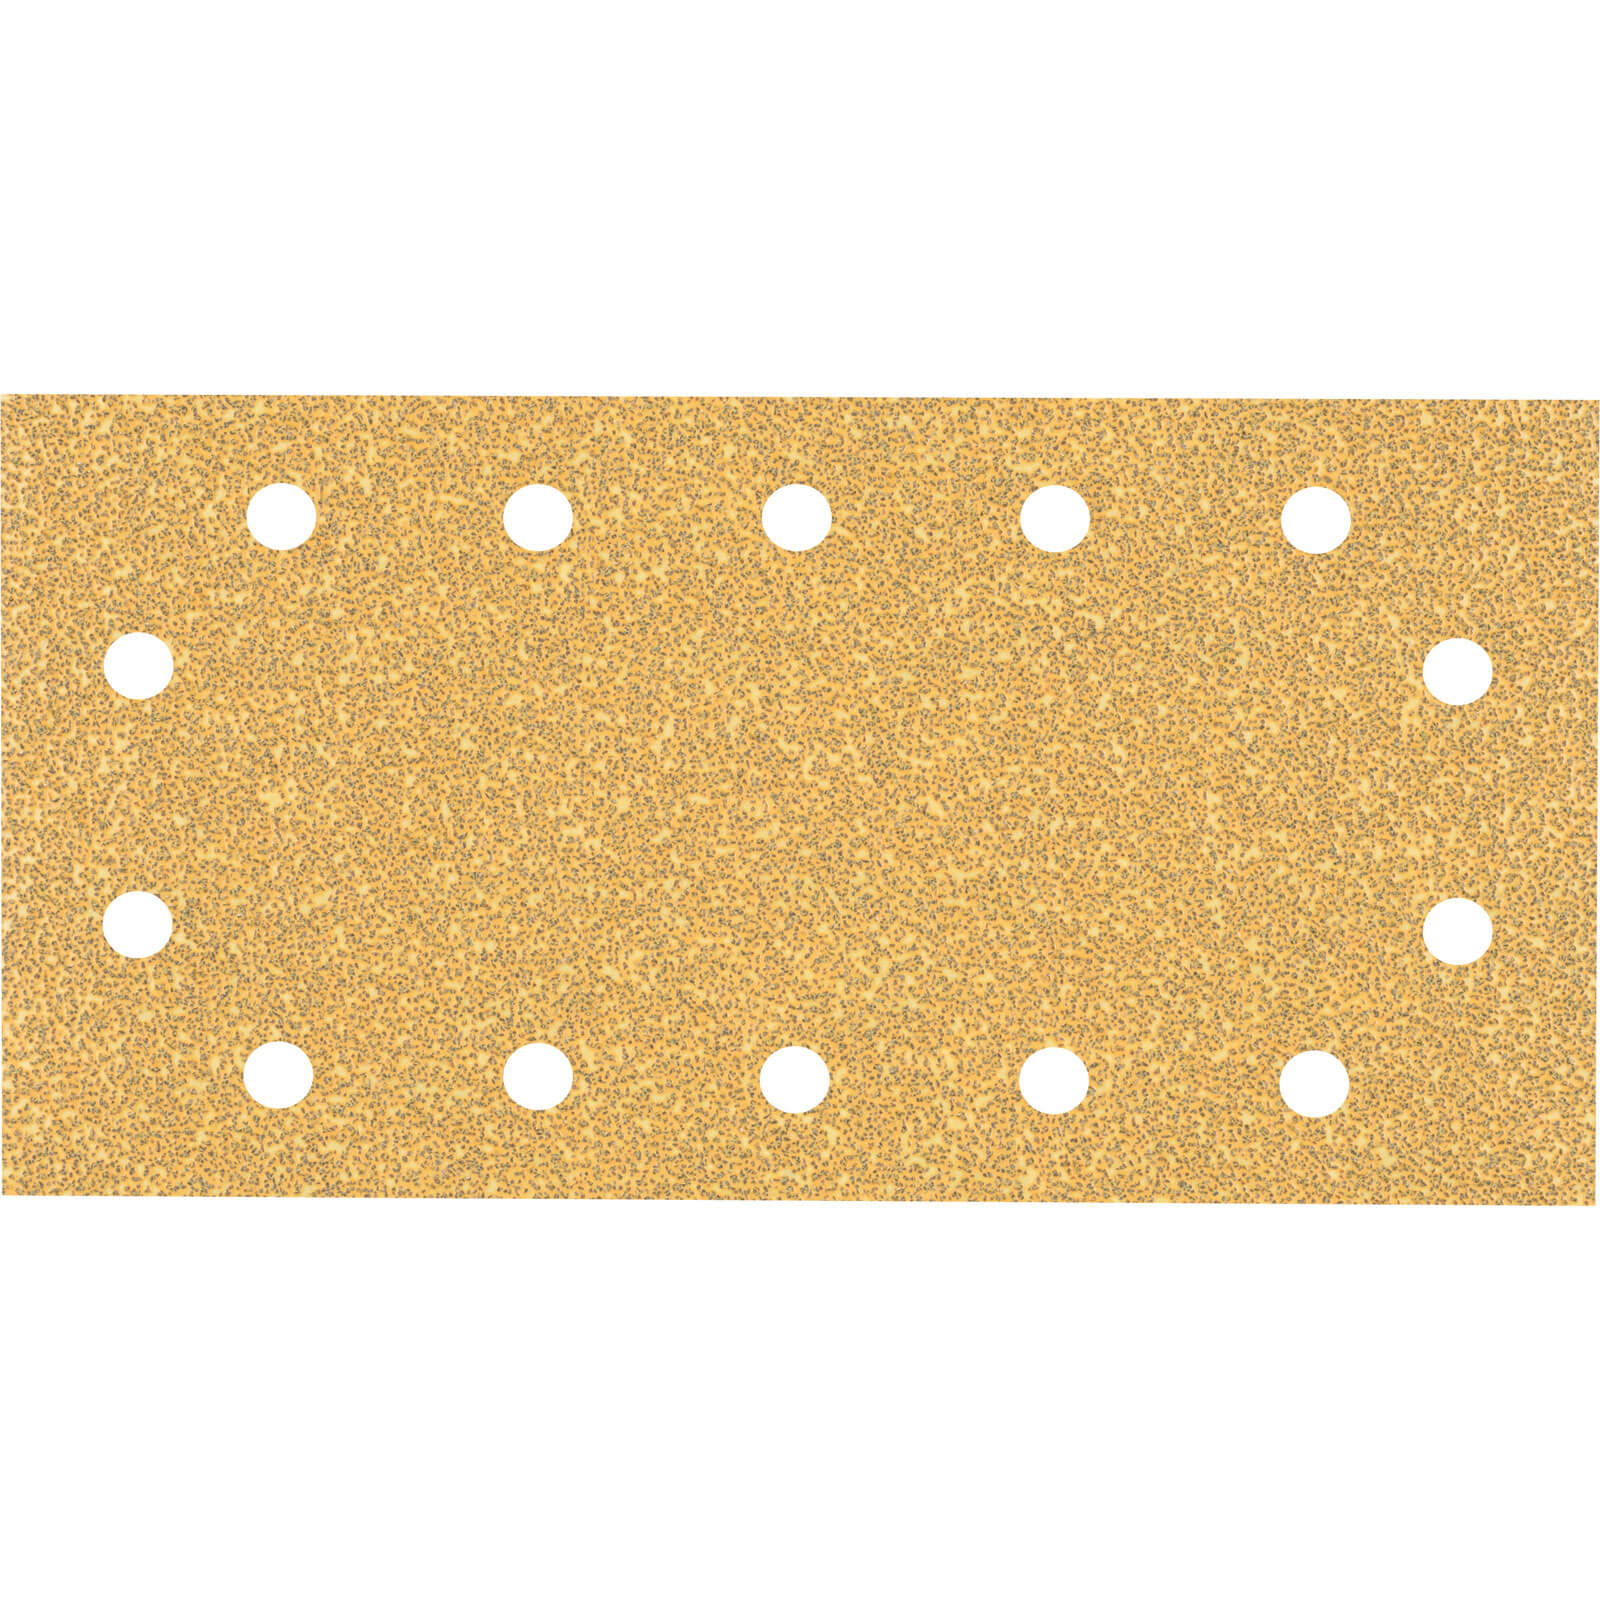 Image of Bosch Expert C470 Punched Hook and Loop 1/2 Sanding Sheets 115mm x 230mm 40g Pack of 50